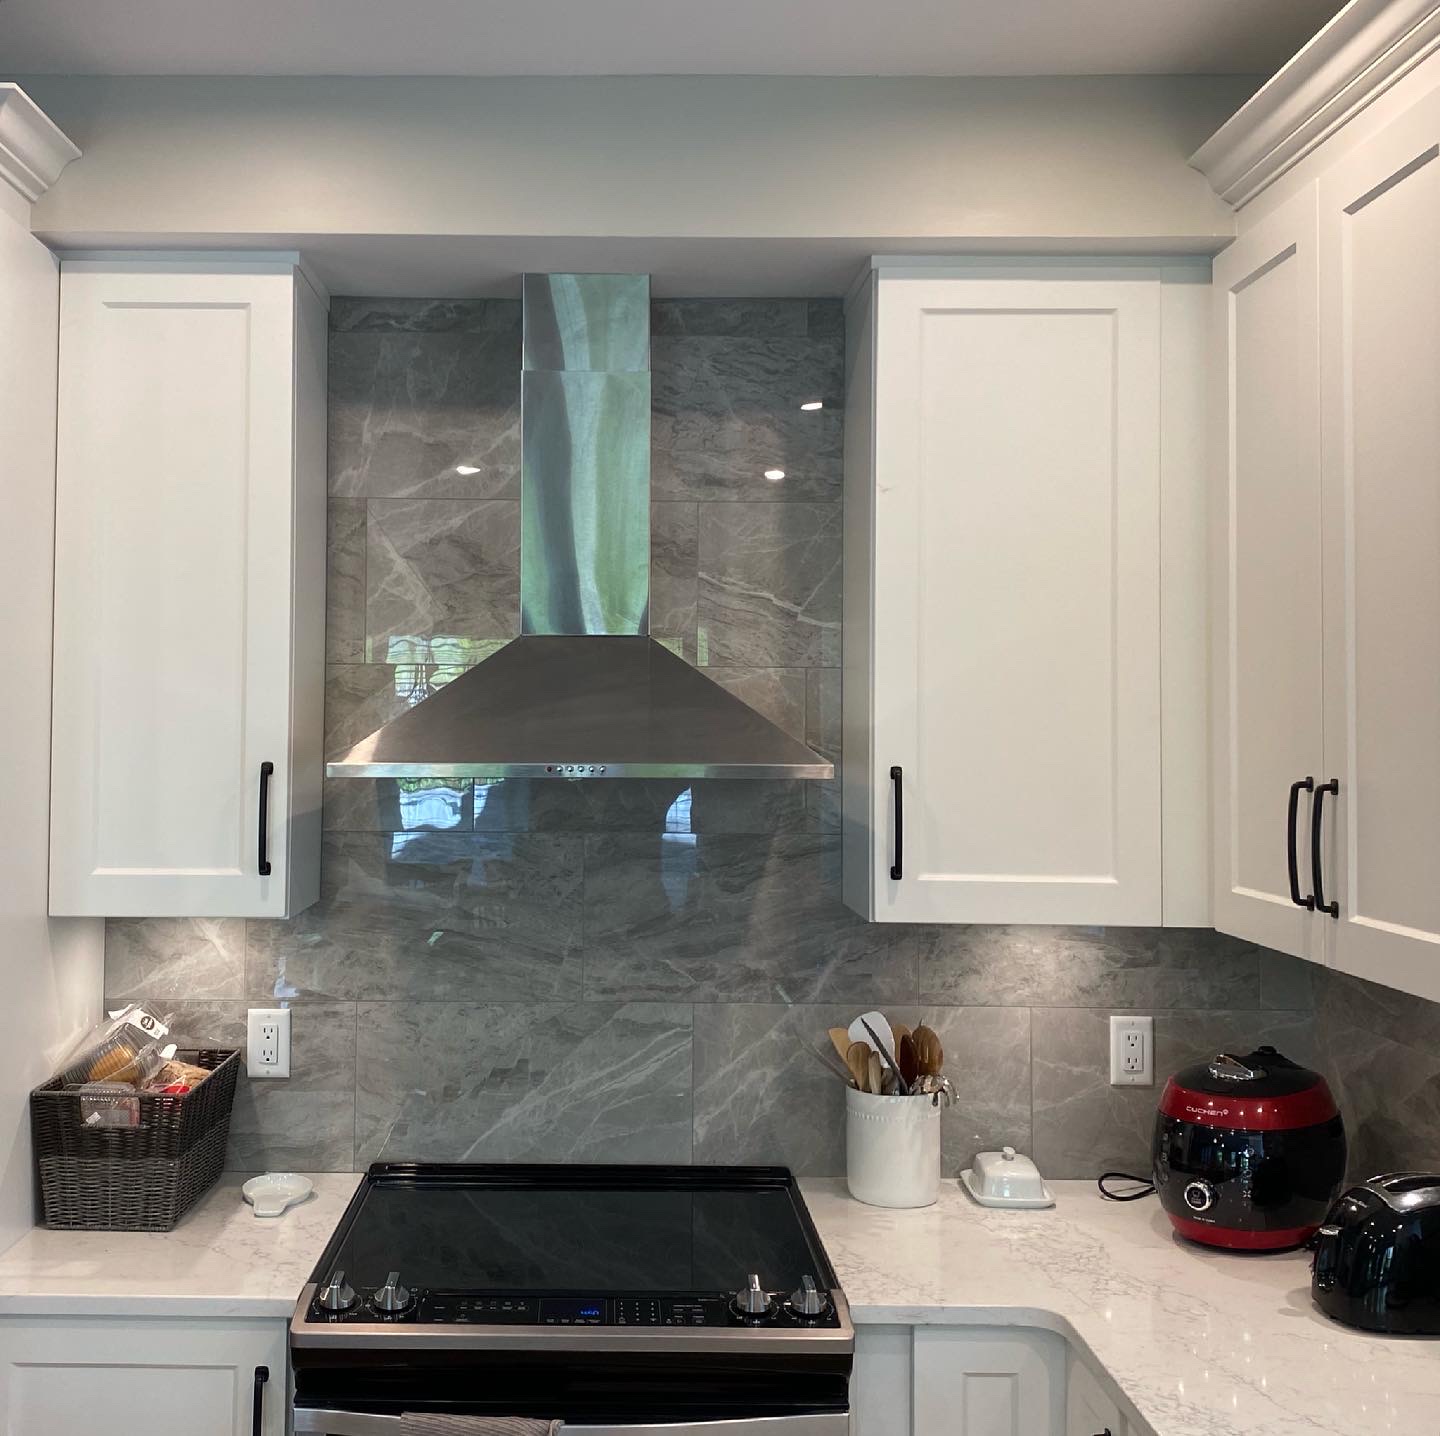 Kitchen Renovation with White Uppers and Light Grey Lowers (after backsplash)